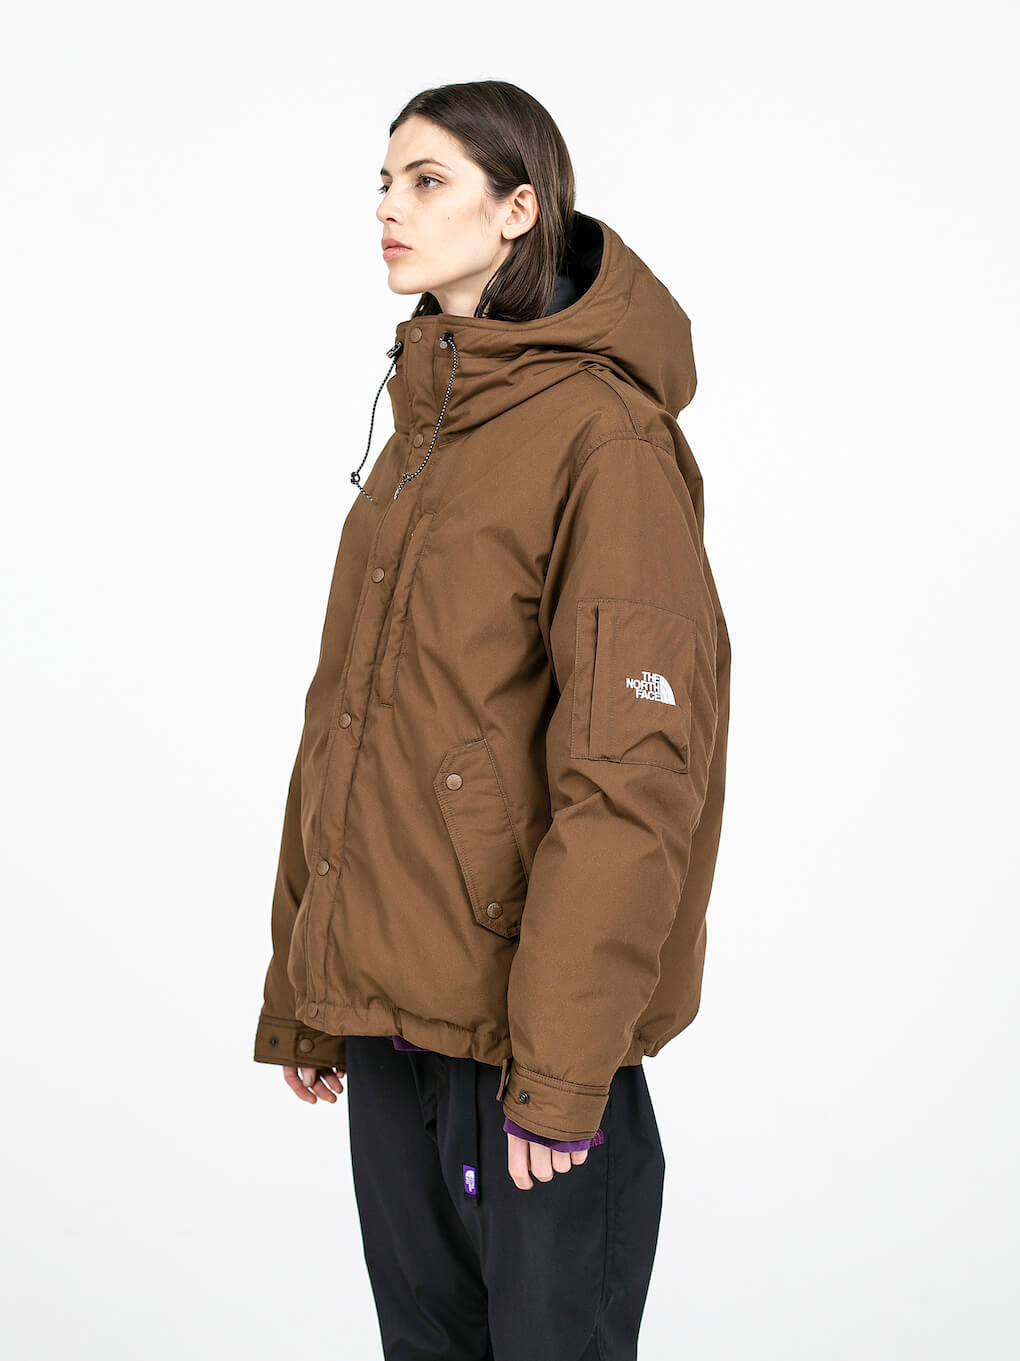 THE NORTH FACE PURPLE LABEL monkey time | nate-hospital.com